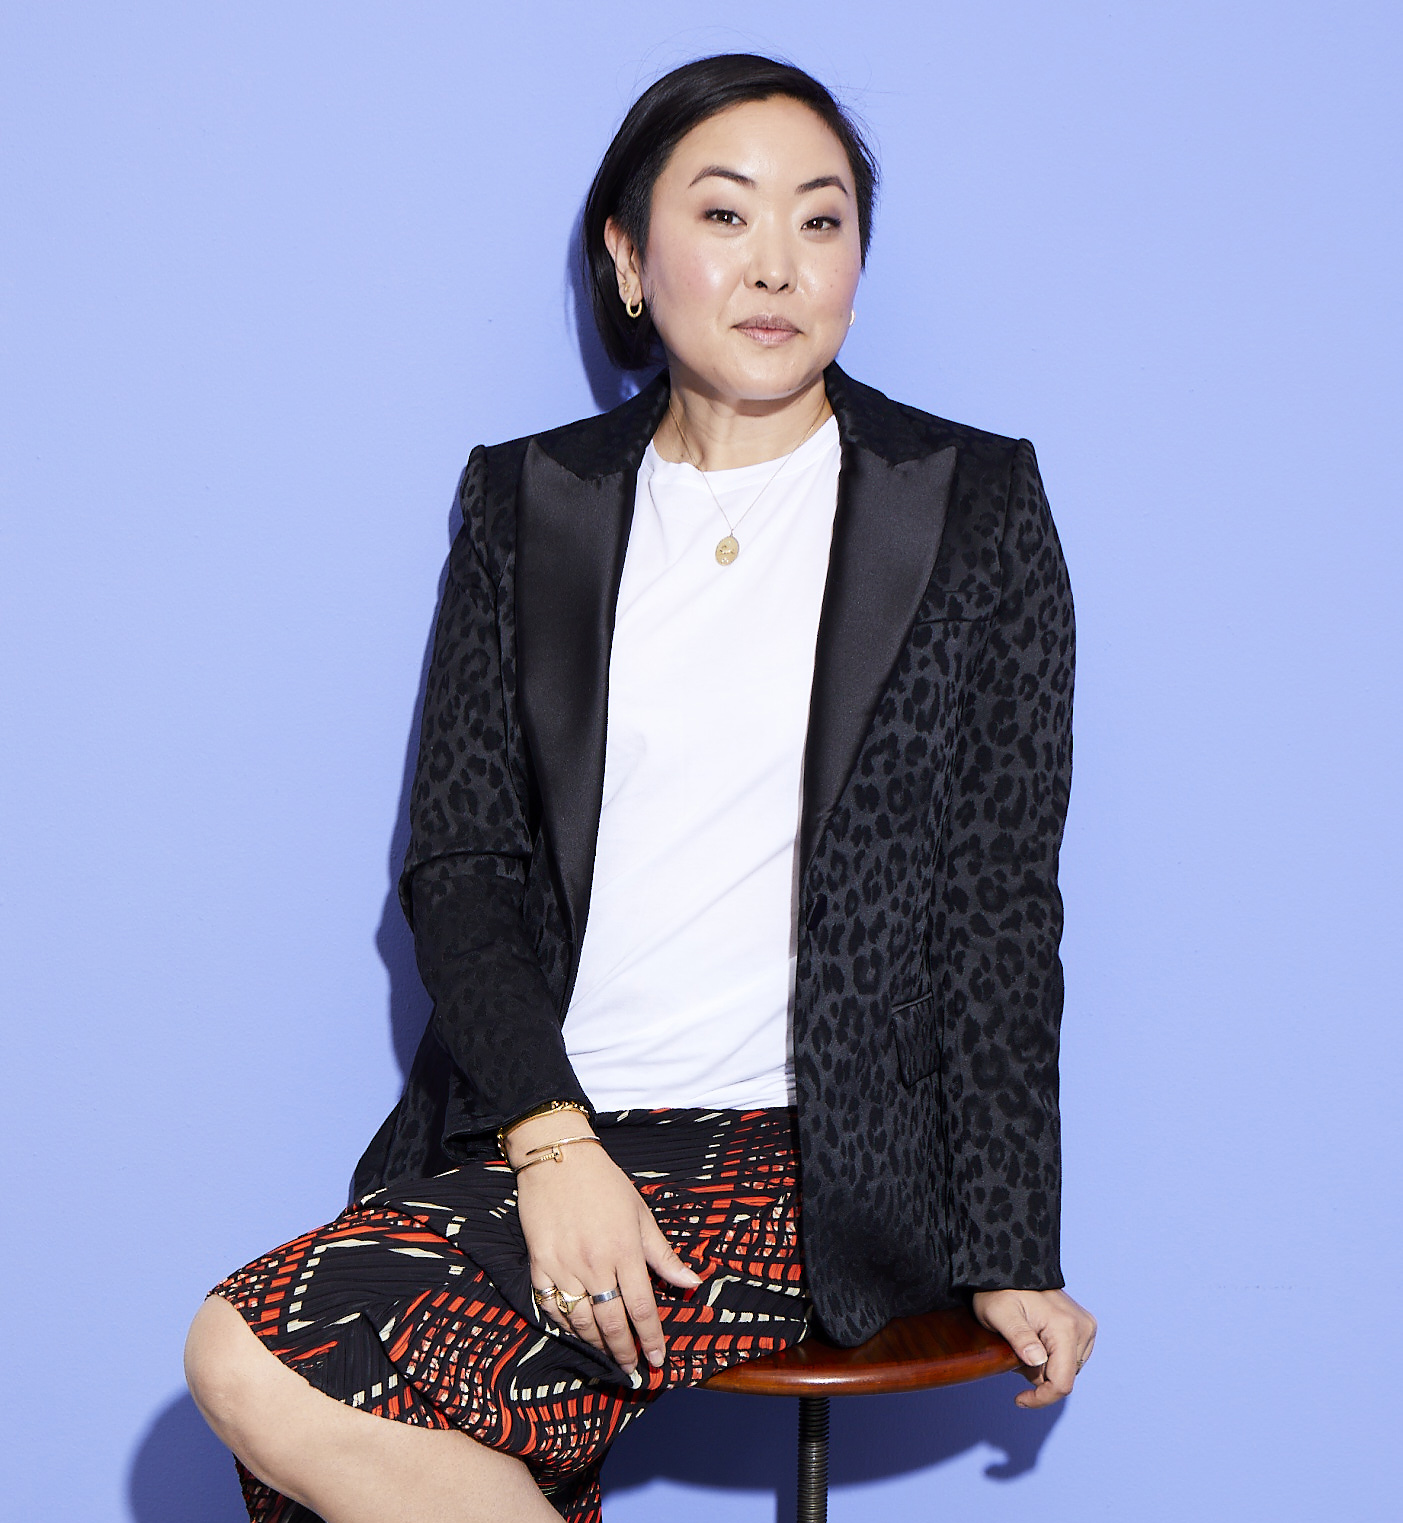 Pinterest hires Marie Claire Editor-In-Chief Aya Kanai as Head of Content and Editorial Partnerships 